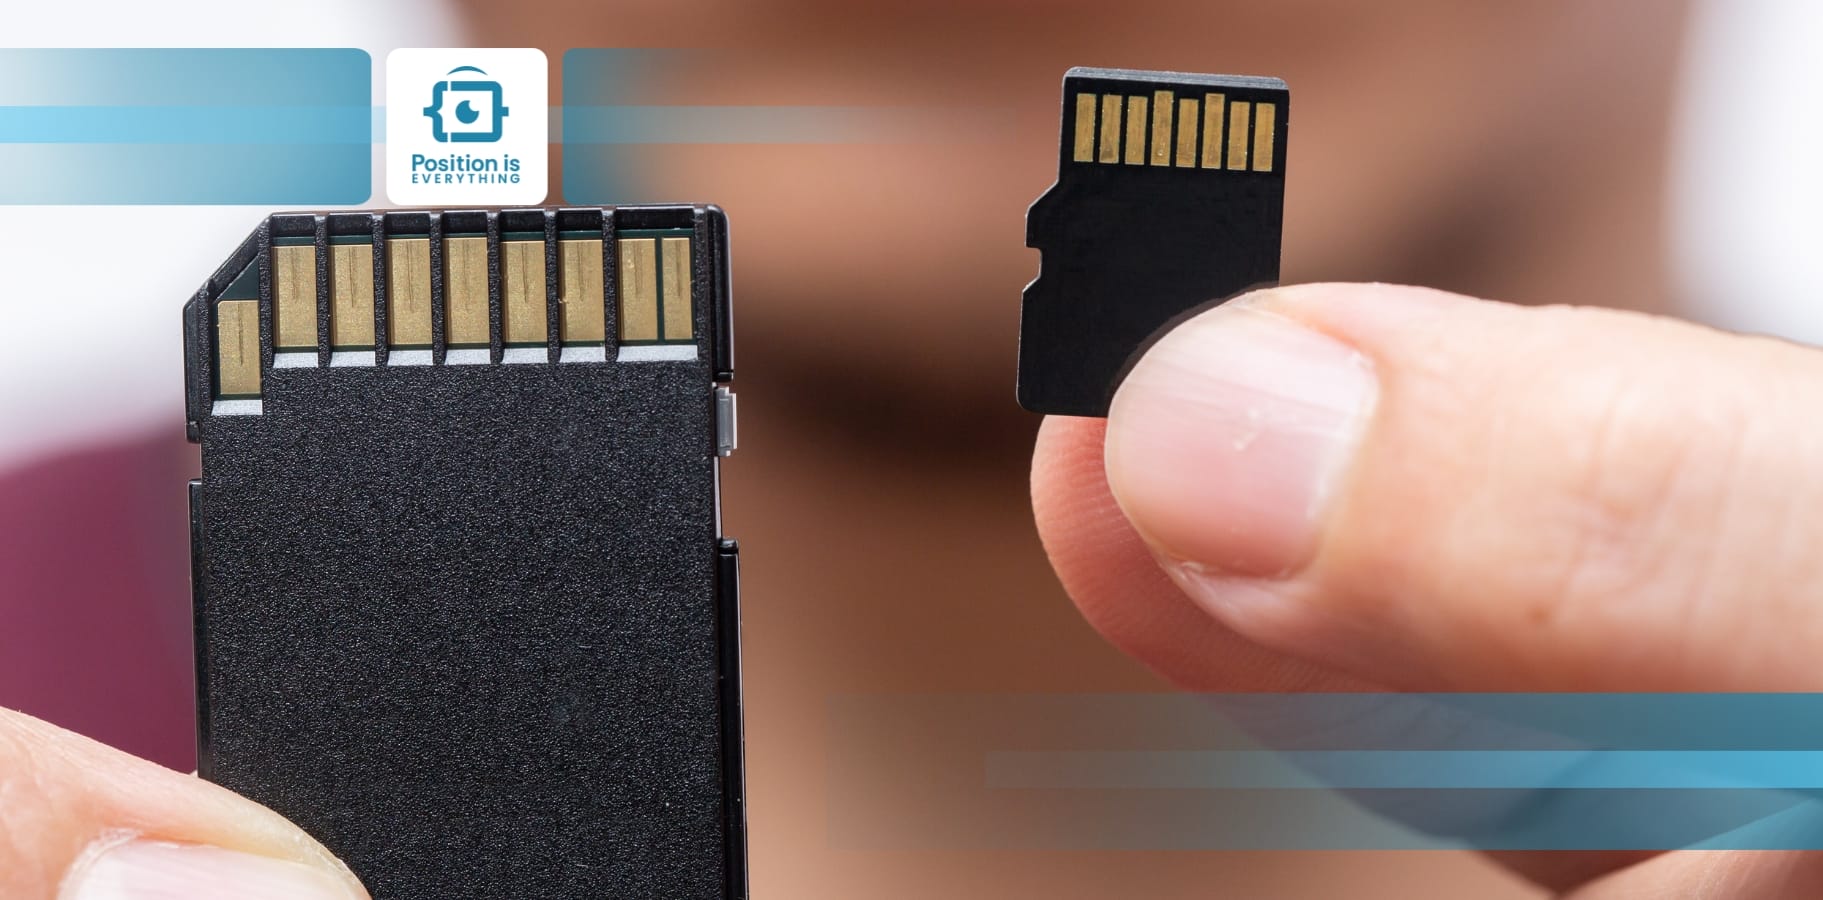 Sd Card Vs Micro Sd Card The Differences Between These Memory Cards Position Is Everything 8836